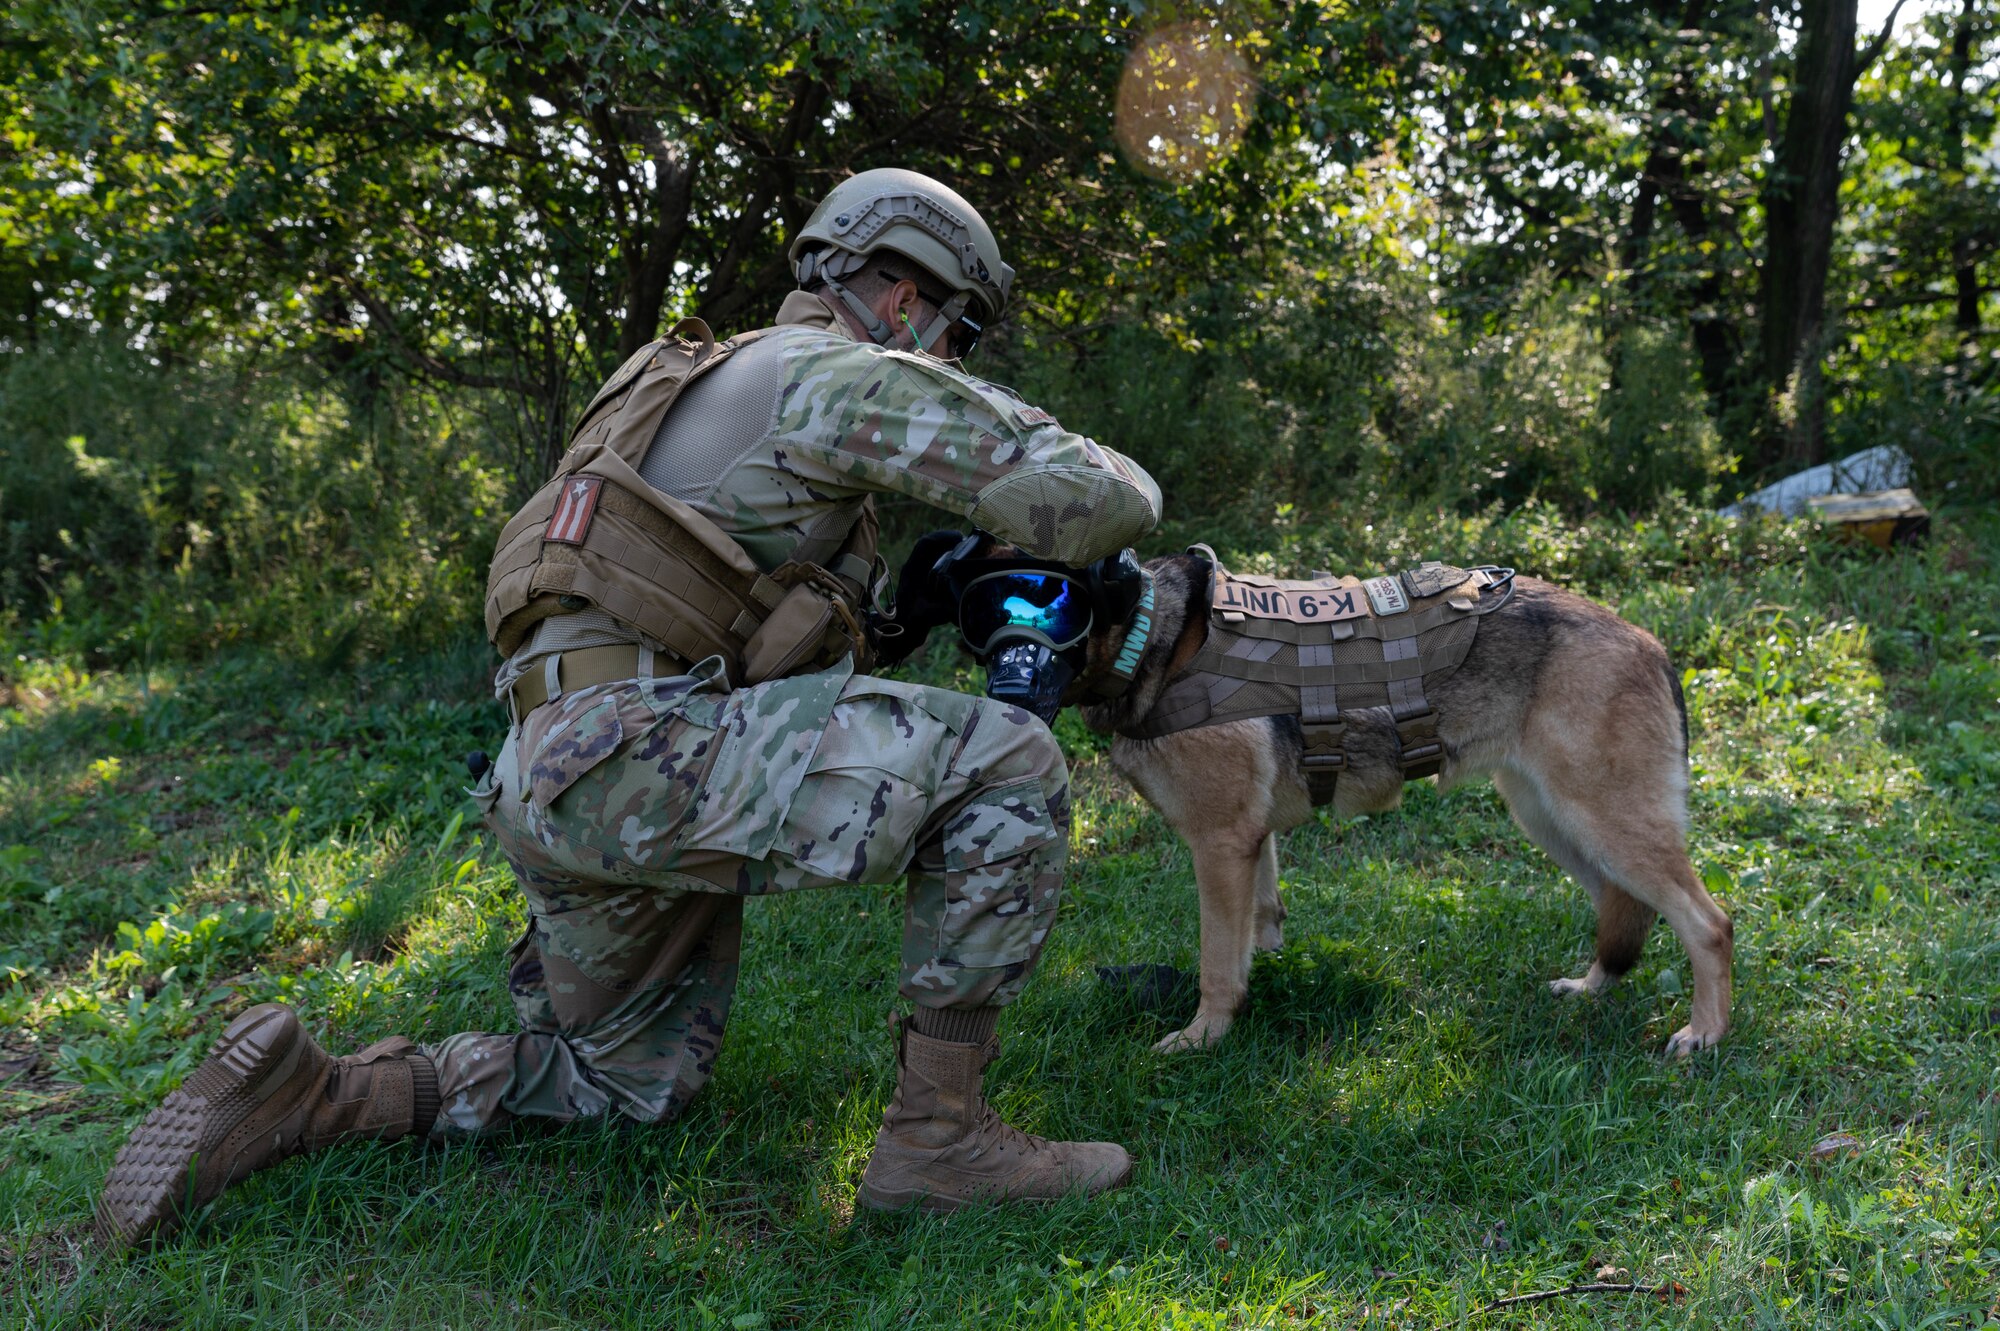 Staff Sgt. Brandon Mitchell, 51st Security Forces squadron, military working dog handler, secures protective eyewear on MWD Diego